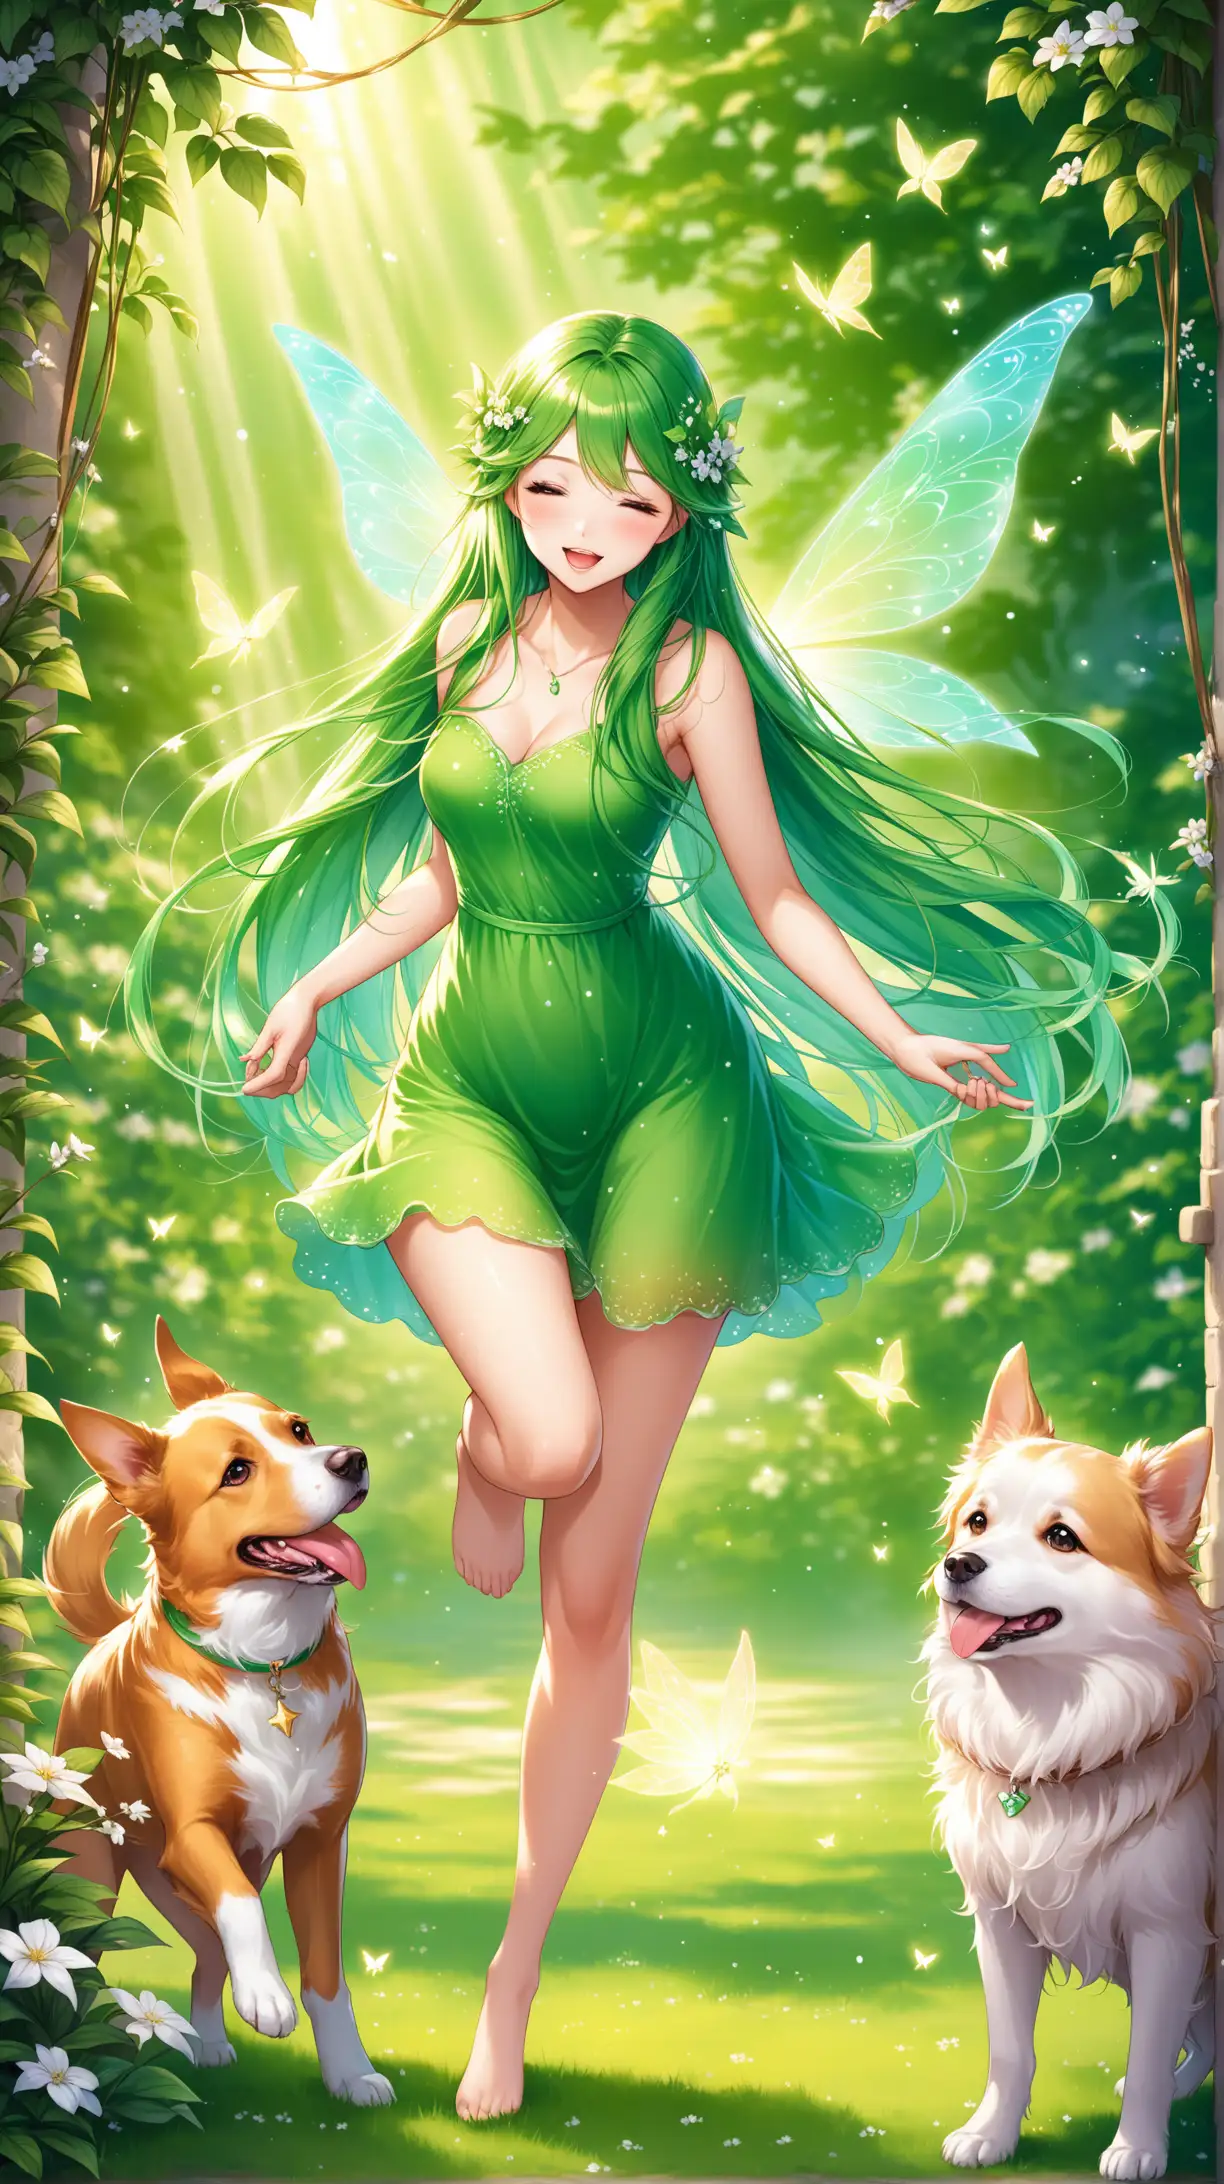 Enchanting Women with Green Hair Playing with a Fairy Dog